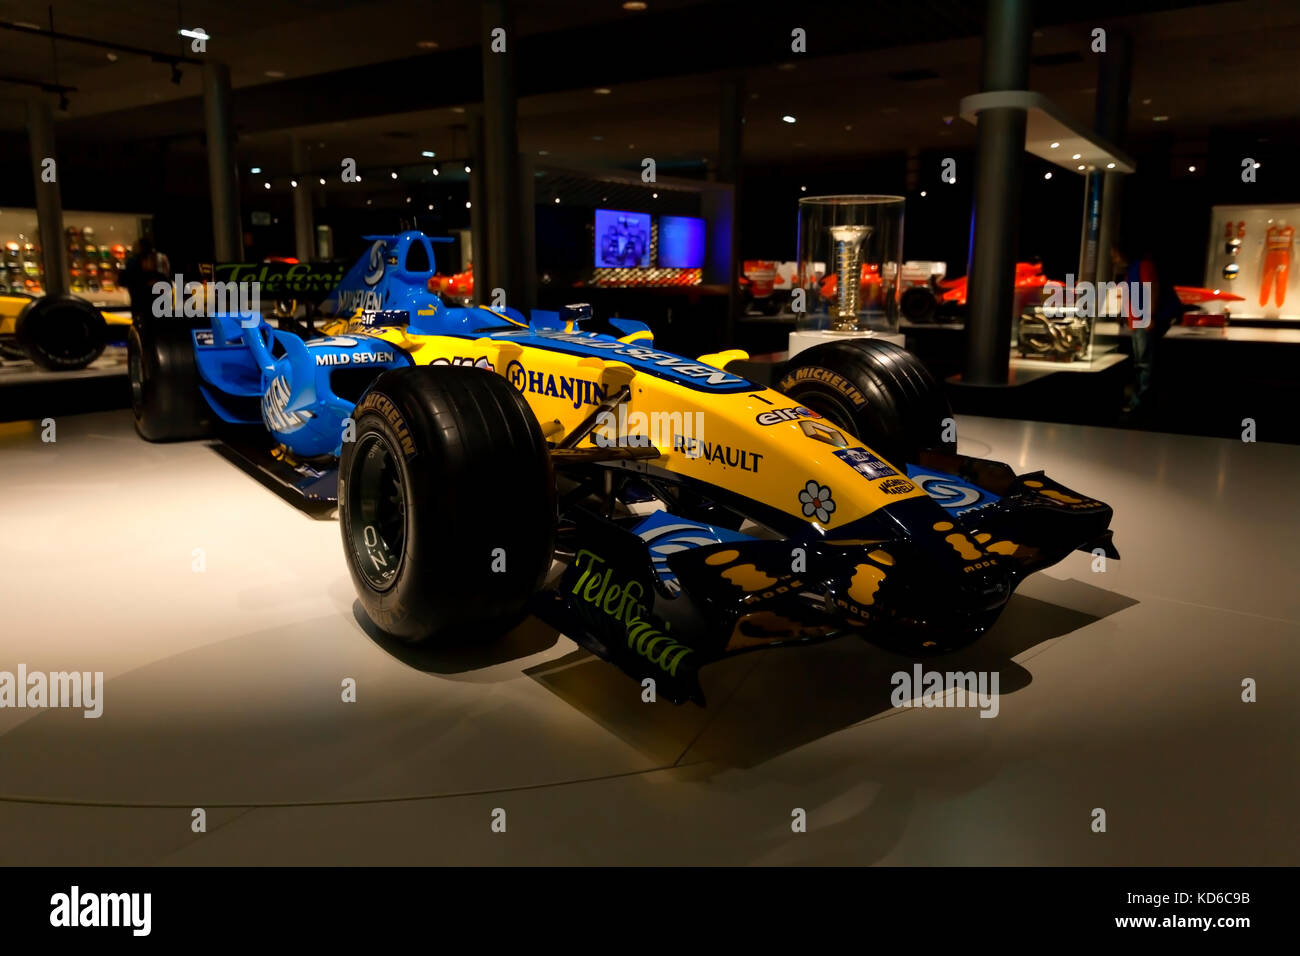 Renault R26 of F1 with which Fernando Alonso was world champion for the second time in 2006. Photograph taken on October, 2017 at the Fernando Al Stock Photo